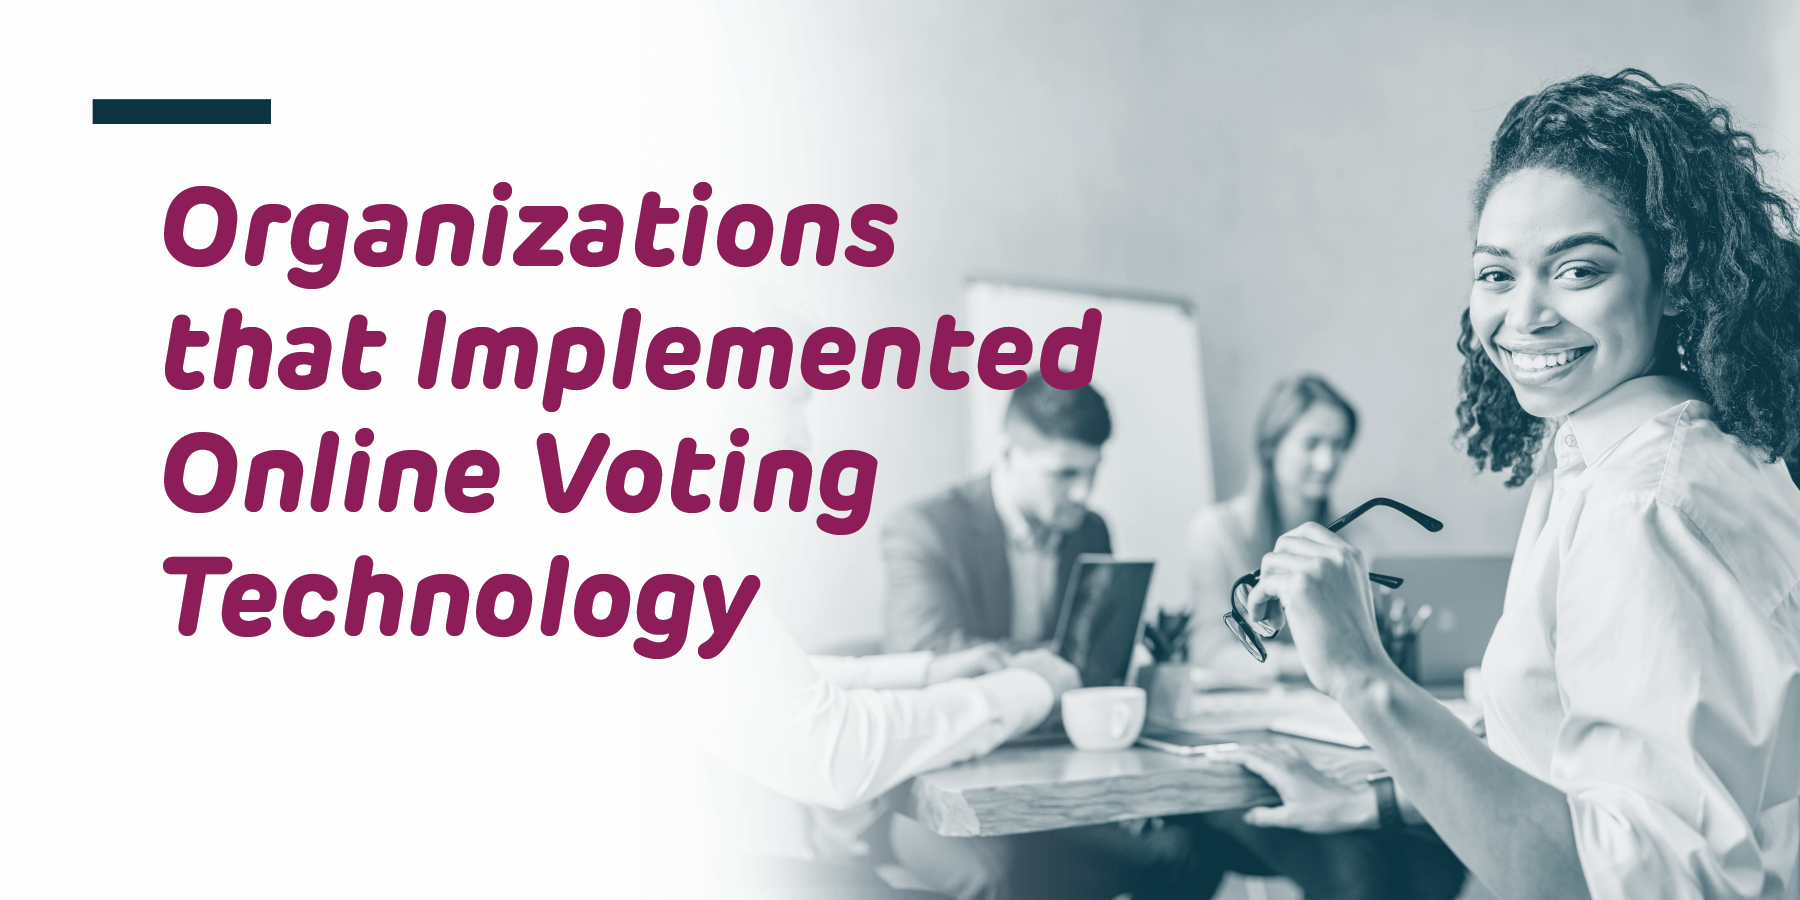 Five Organizations that Implemented Online Voting Technology